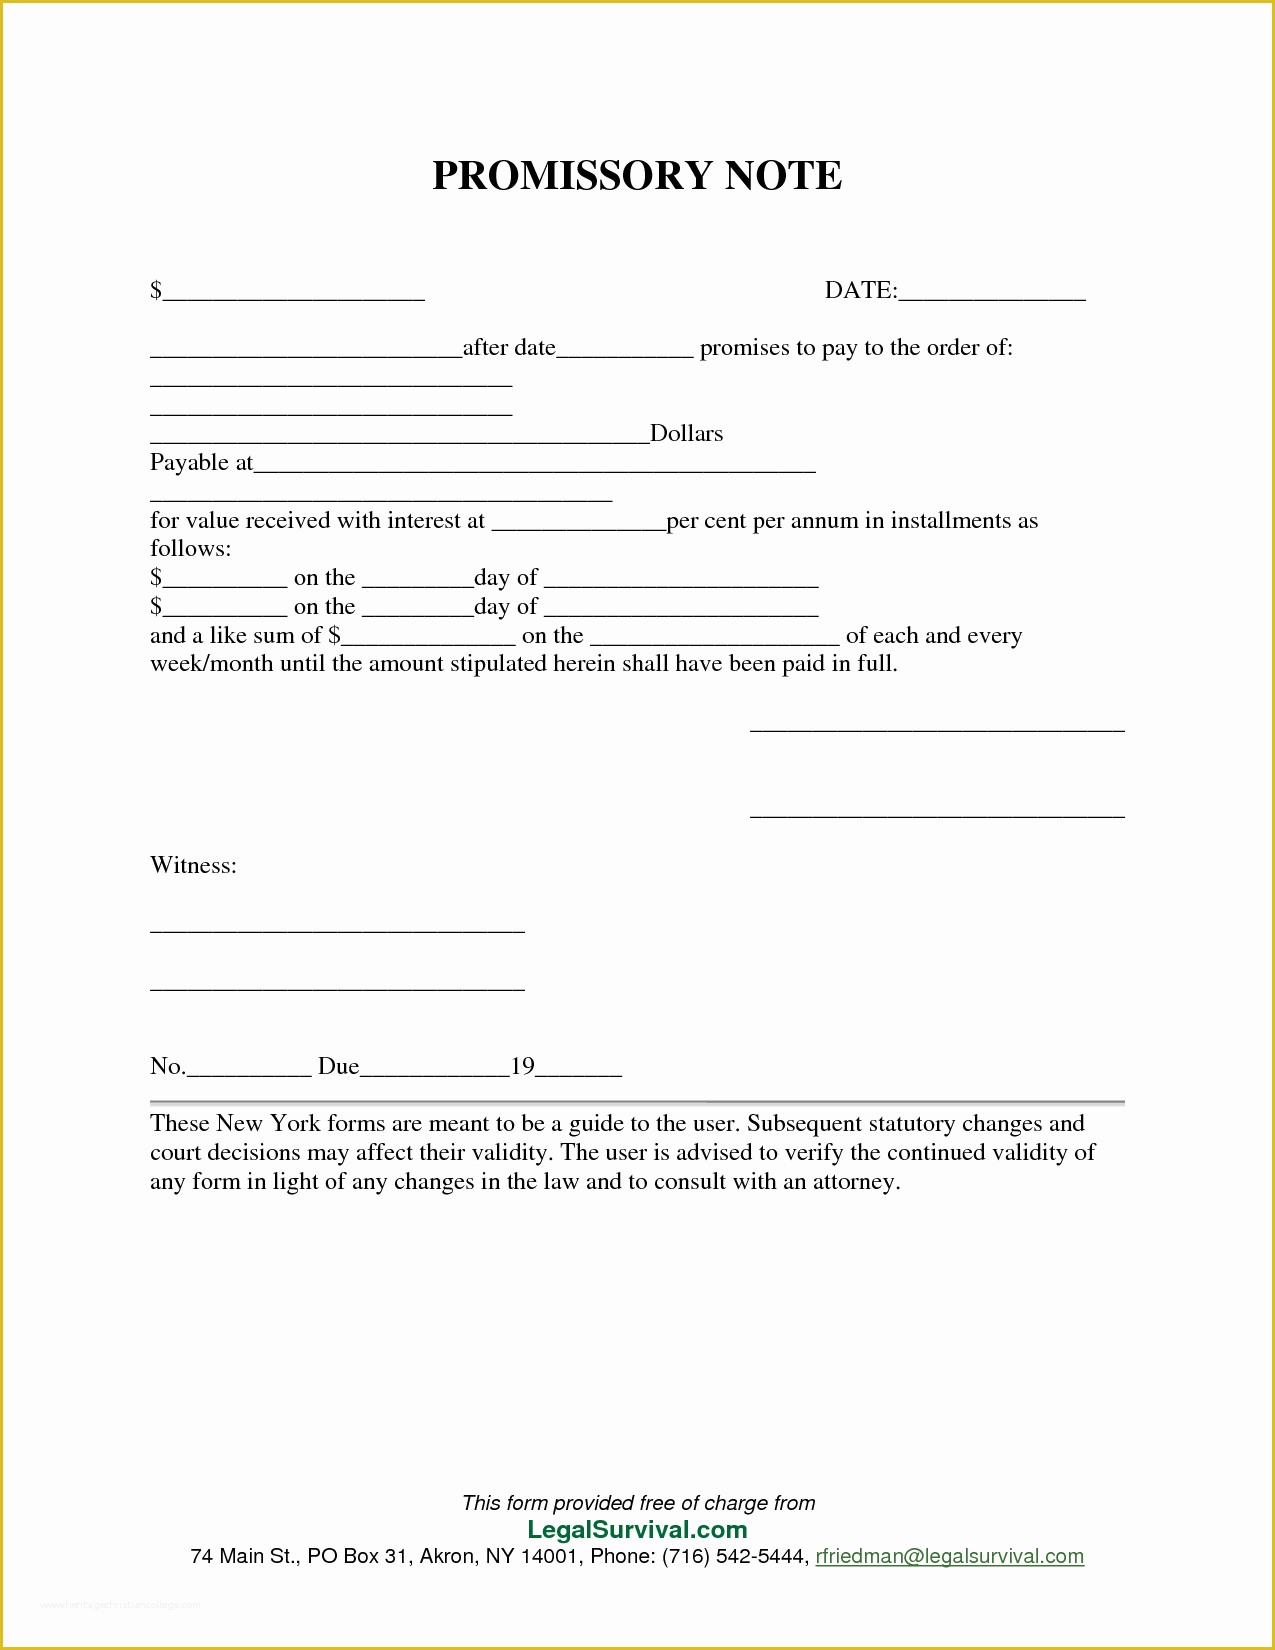 Free Promissory Note Template for A Vehicle Of Permalink to Free Promissory Note Template …